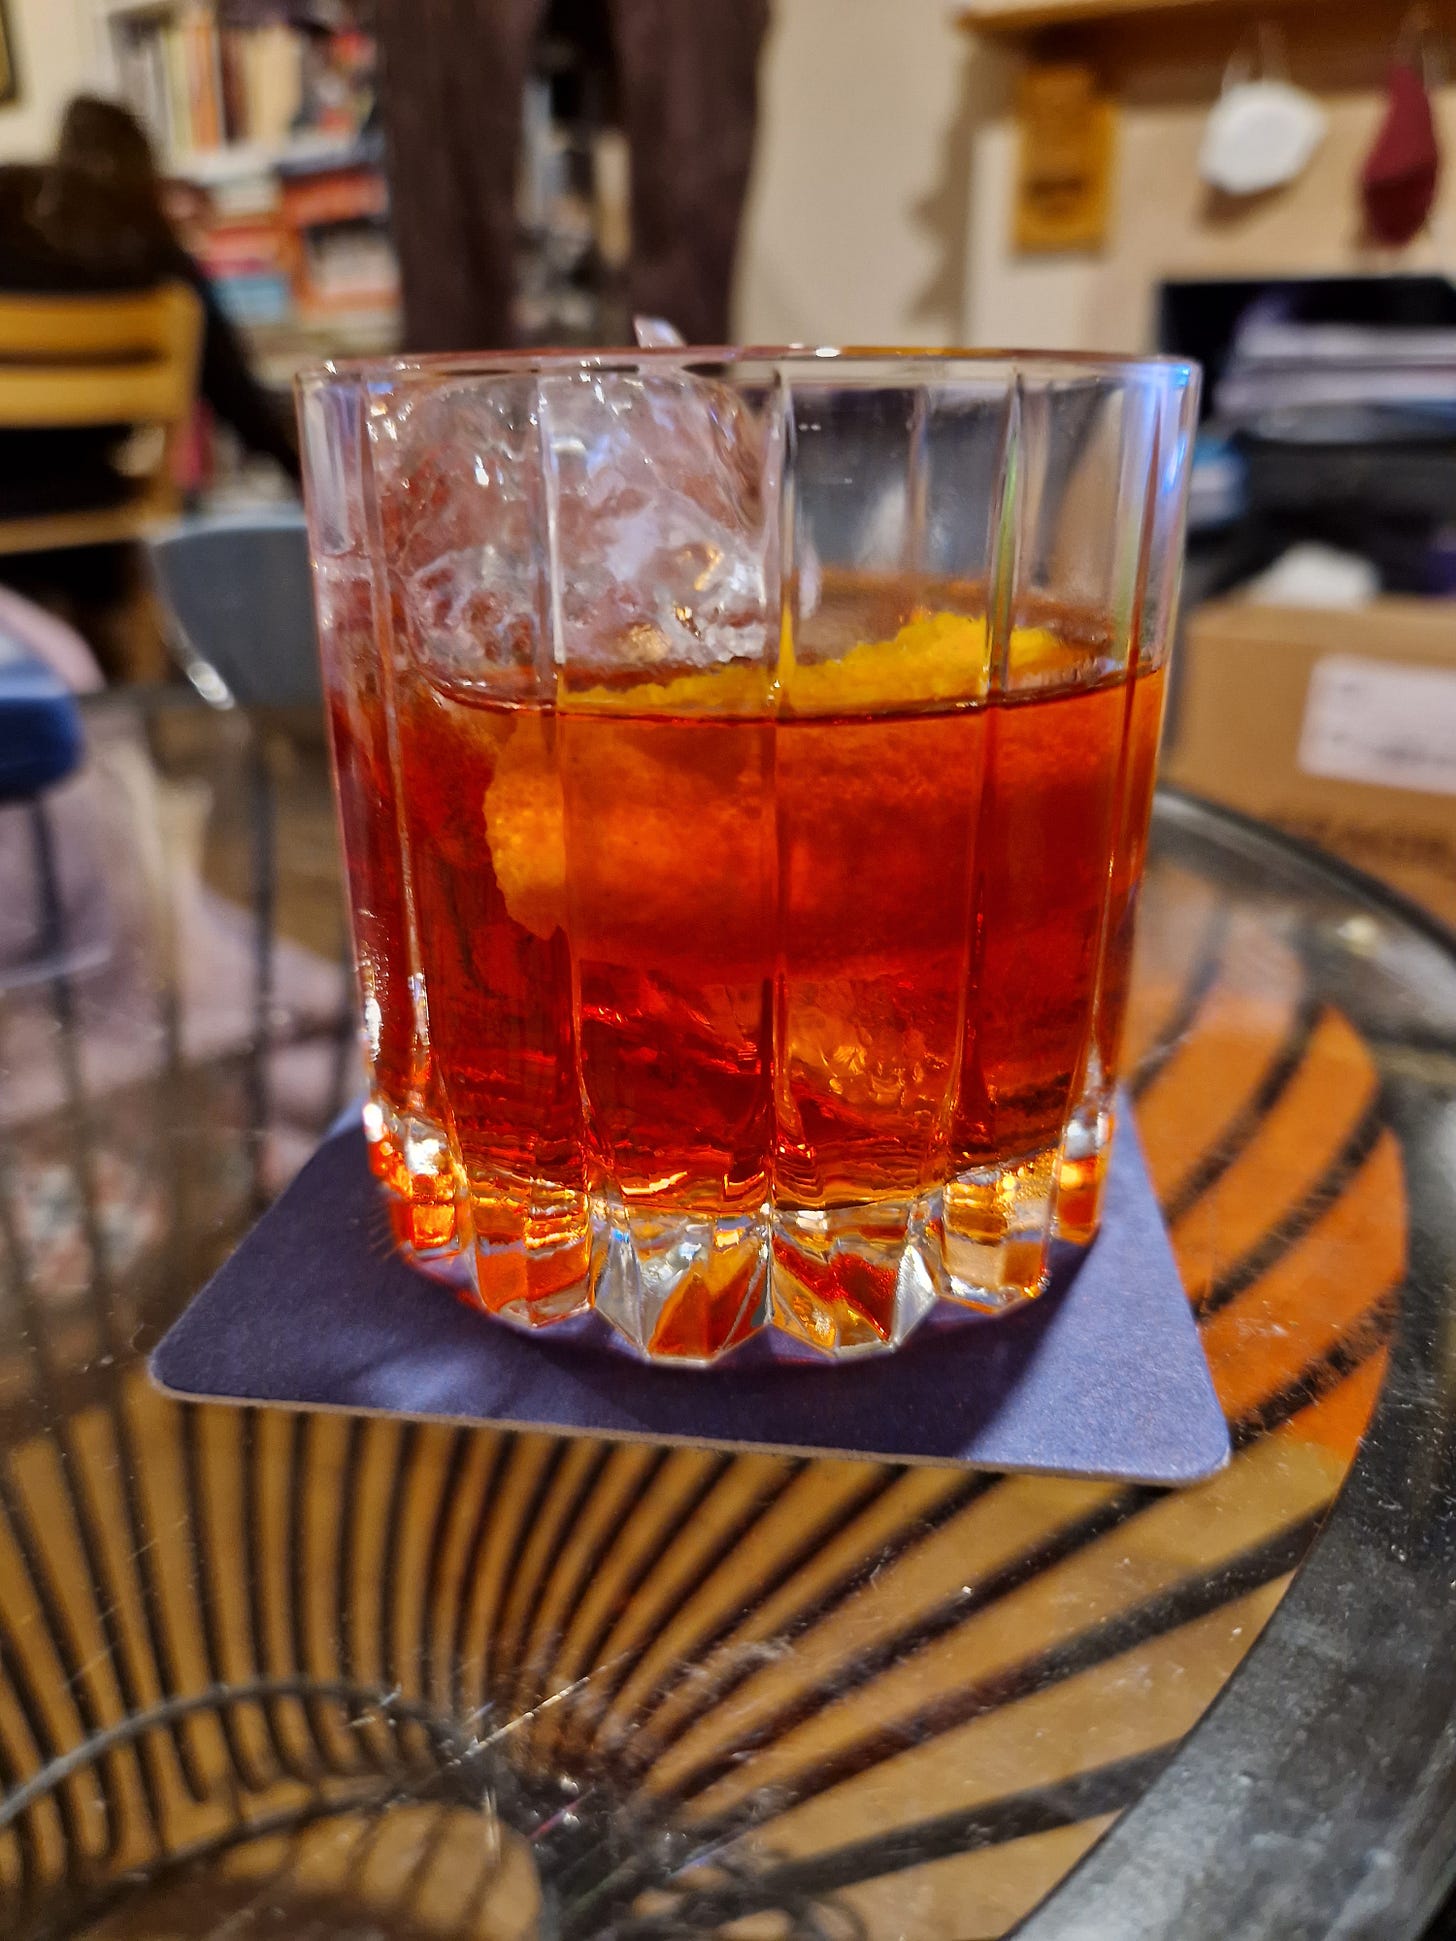 A glass holding a negroni cocktail, on a coaster, on a glass-topped table.